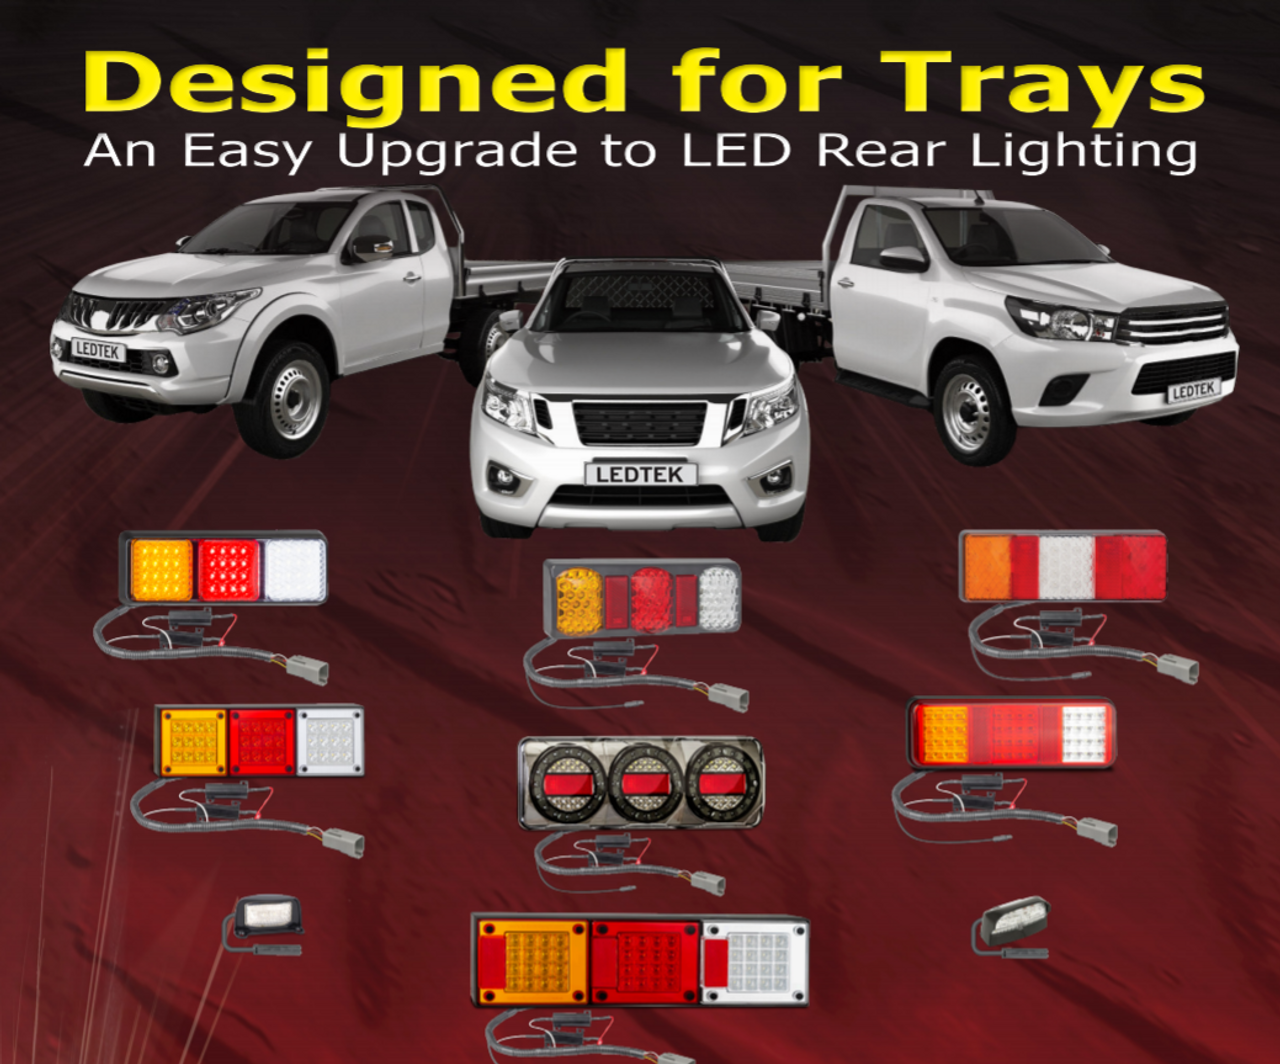 280ARWM2LR12/450+PATCHD-MAX - Vehicle LED Patch Cable System. Easy LED Upgrade. Designed for Trays. 280 Series Light. Stop, Tail, Indicator and Reverse. 12v Only. Lamp with Conversion Cable. Application to Suit Isuzu D-Max. Autolamp. Ultimate LED.